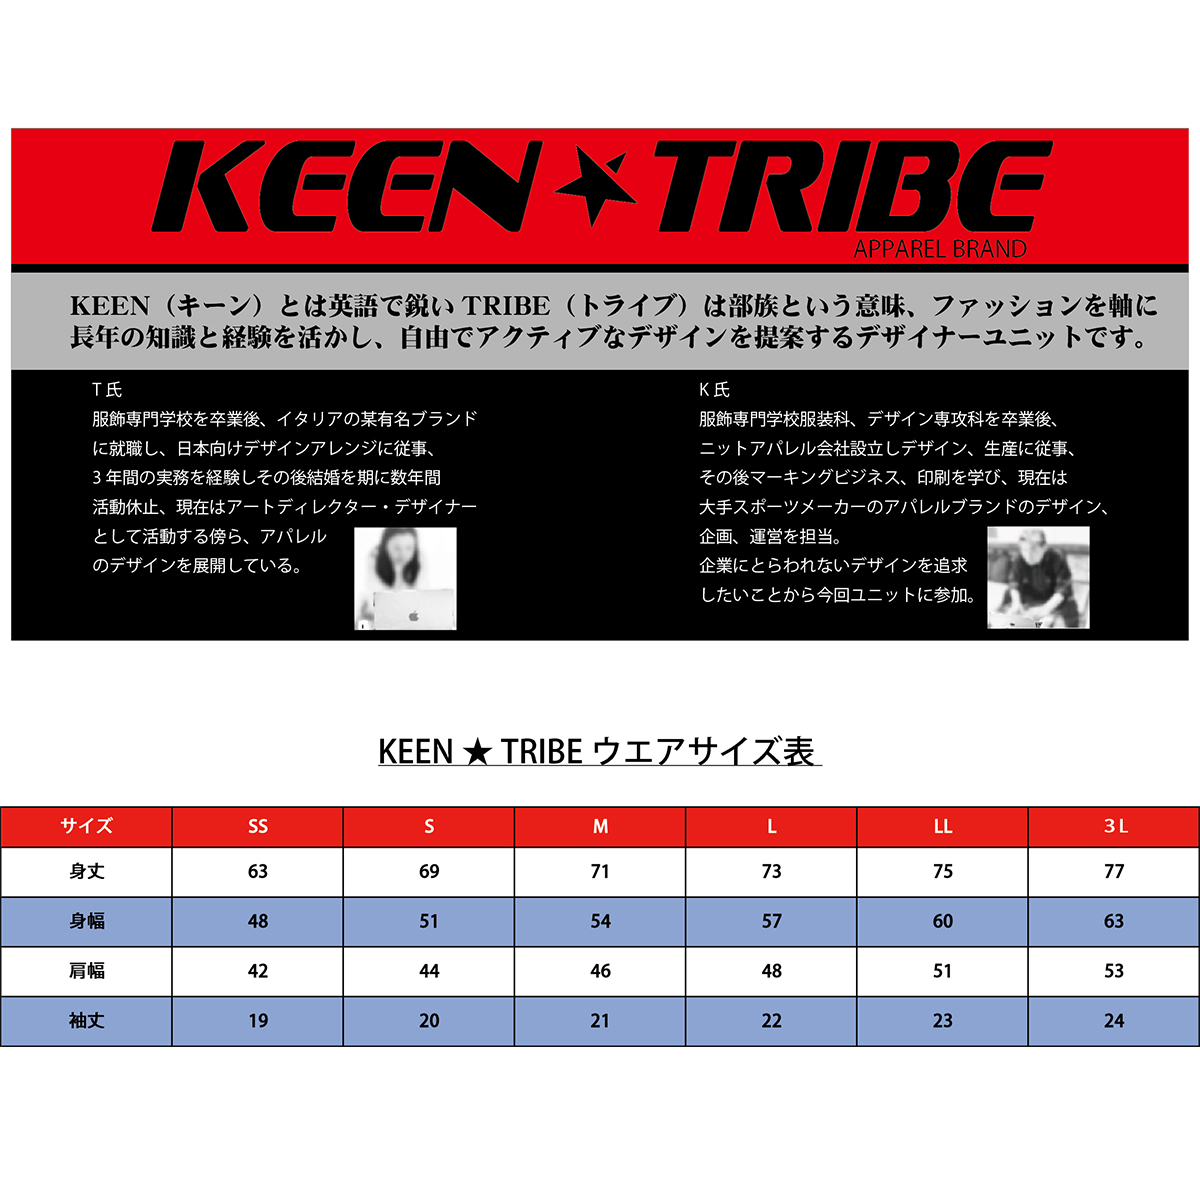 KEEN ★ TRIBE　KT-63(受注生産)